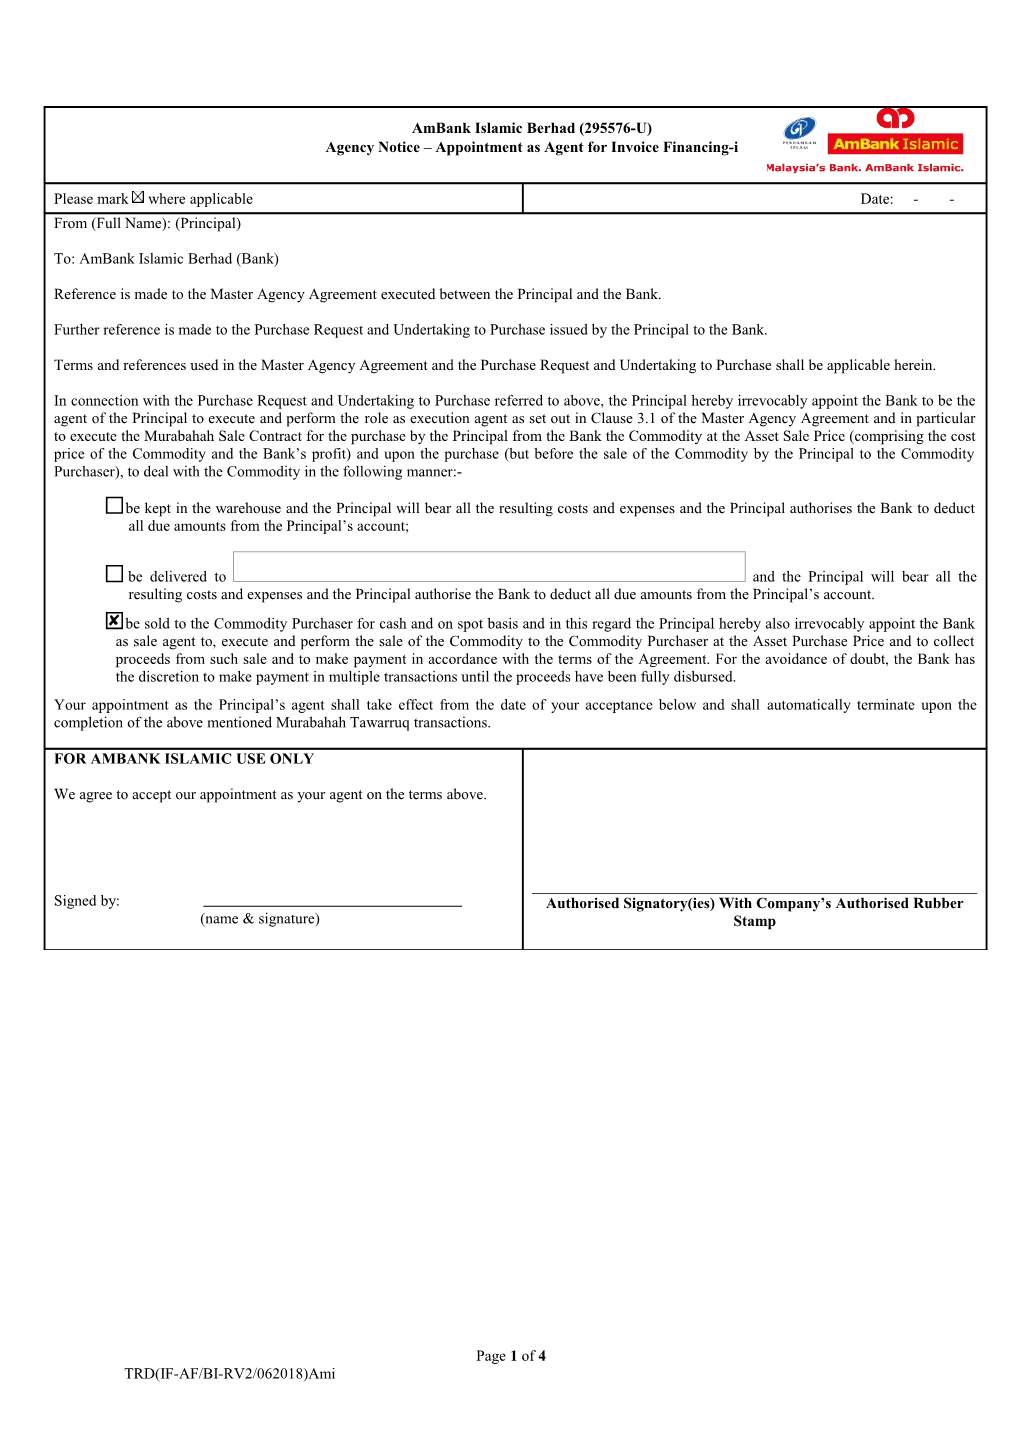 Purchase Request and Undertaking to Purchase